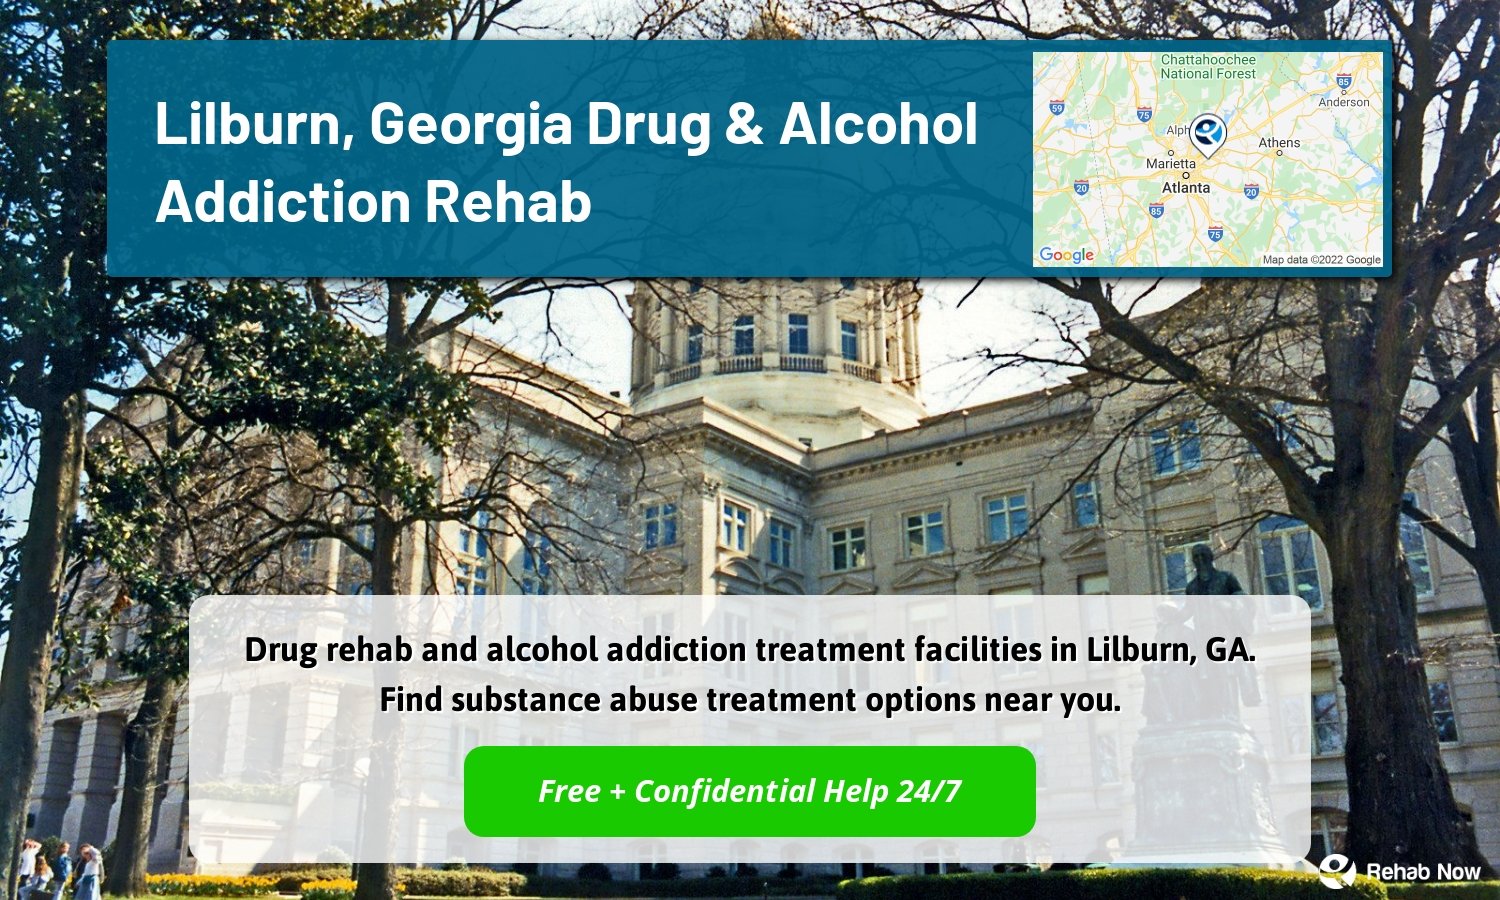 Drug rehab and alcohol addiction treatment facilities in Lilburn, GA. Find substance abuse treatment options near you.